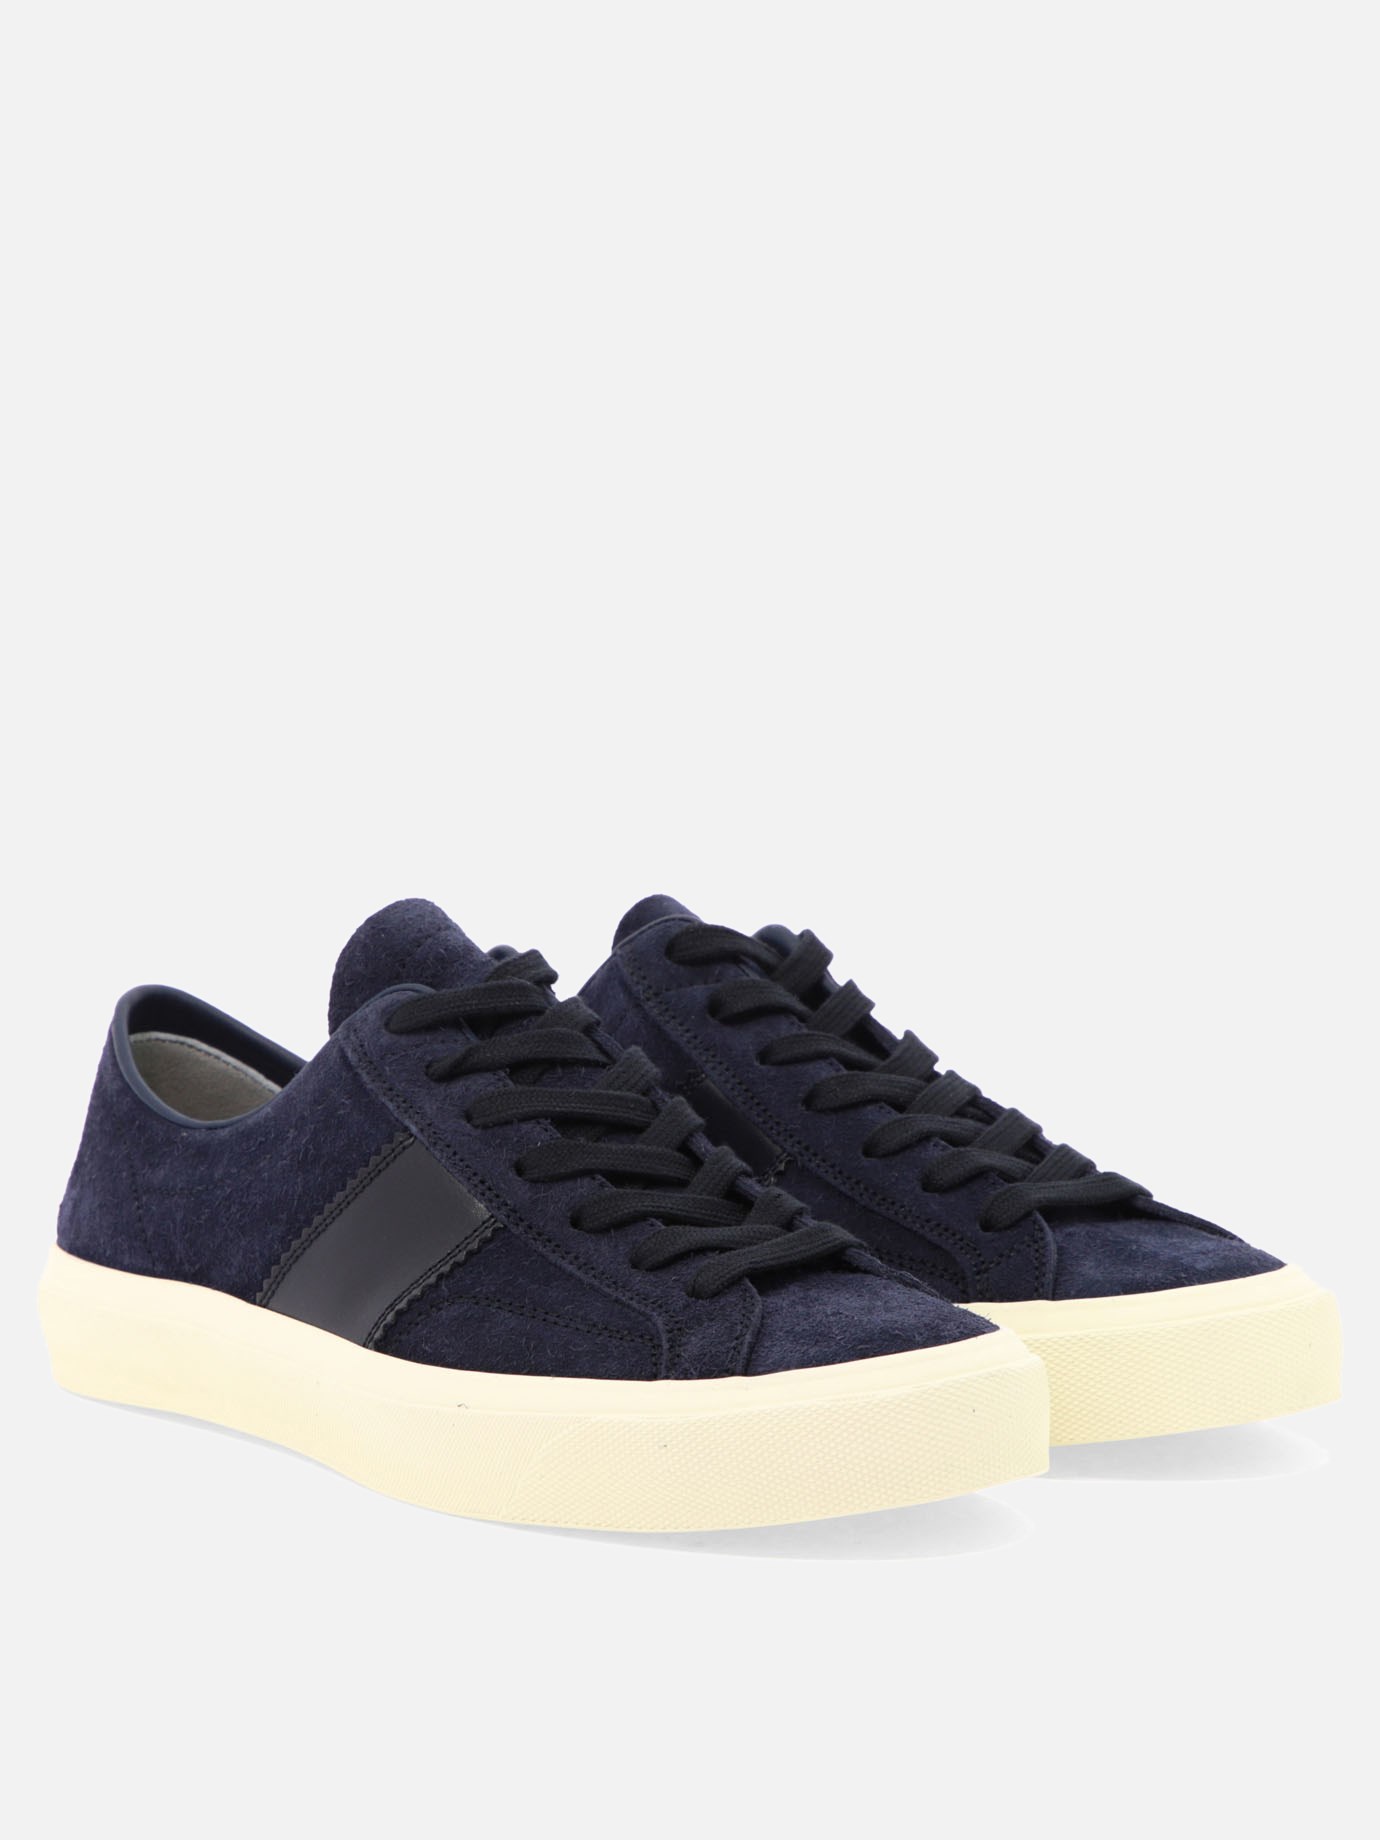 Sneaker  Cambridge  by Tom Ford